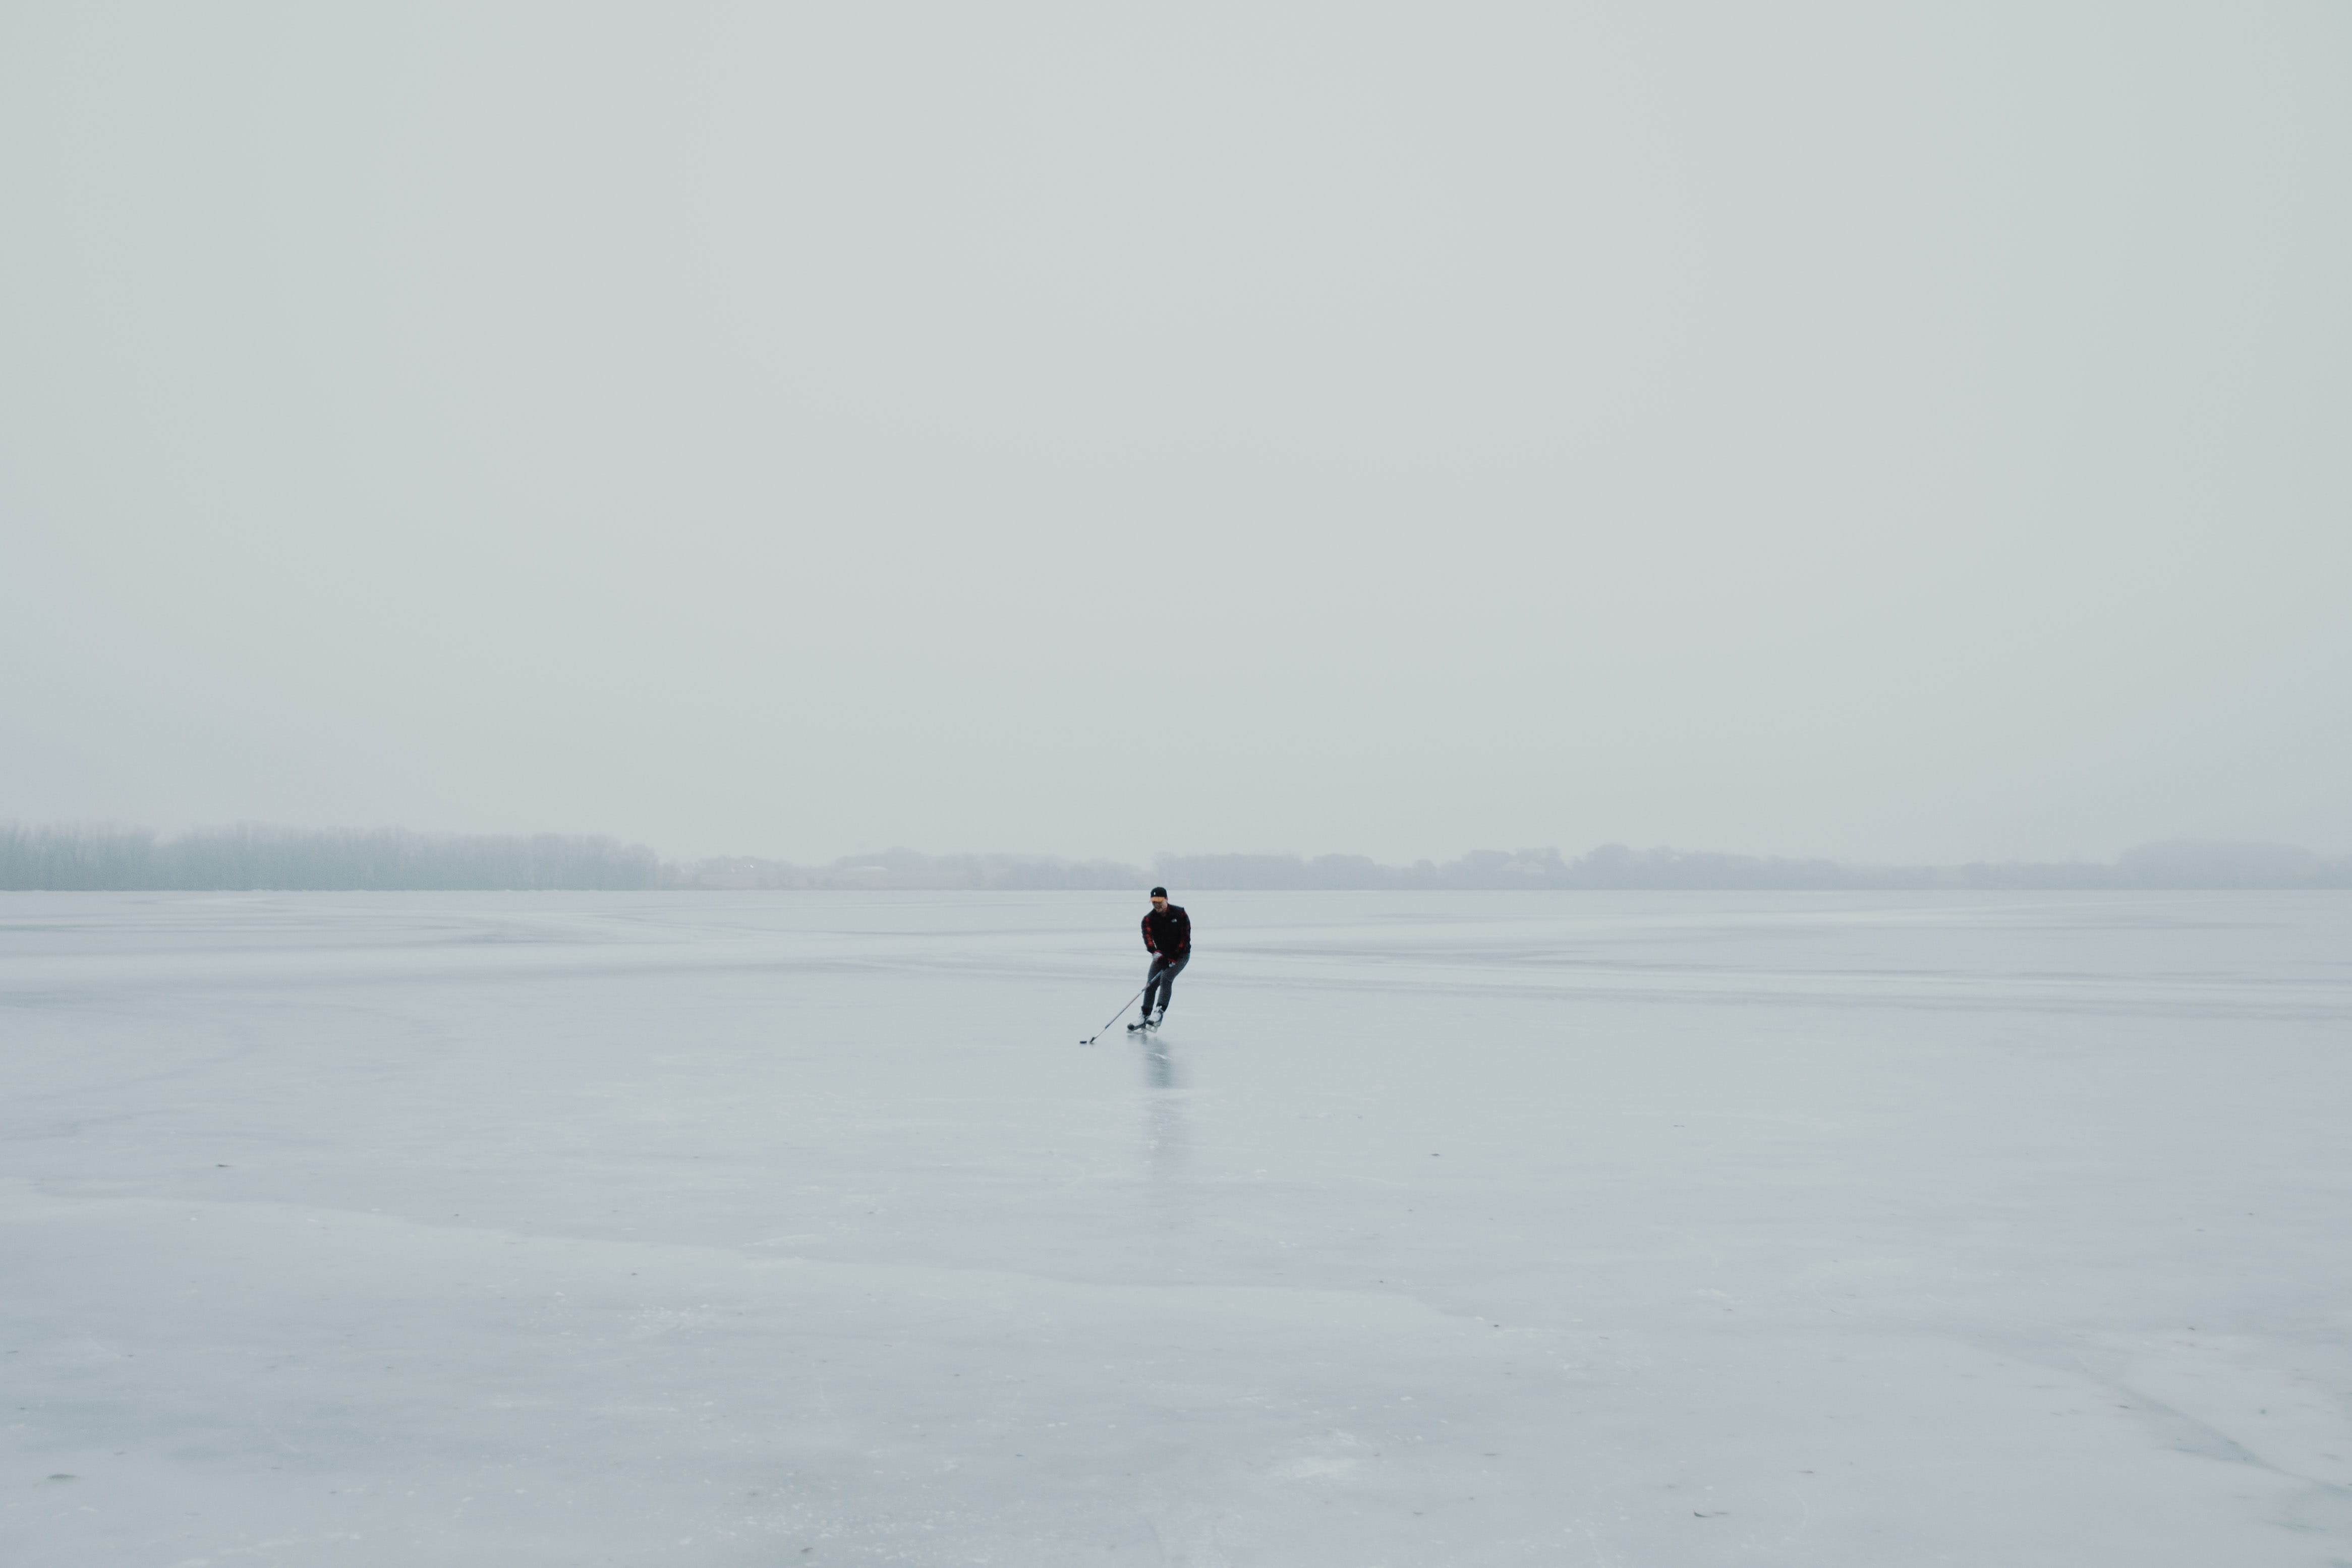 person in sea, human, nature, outdoors, grey, winter, ice skating